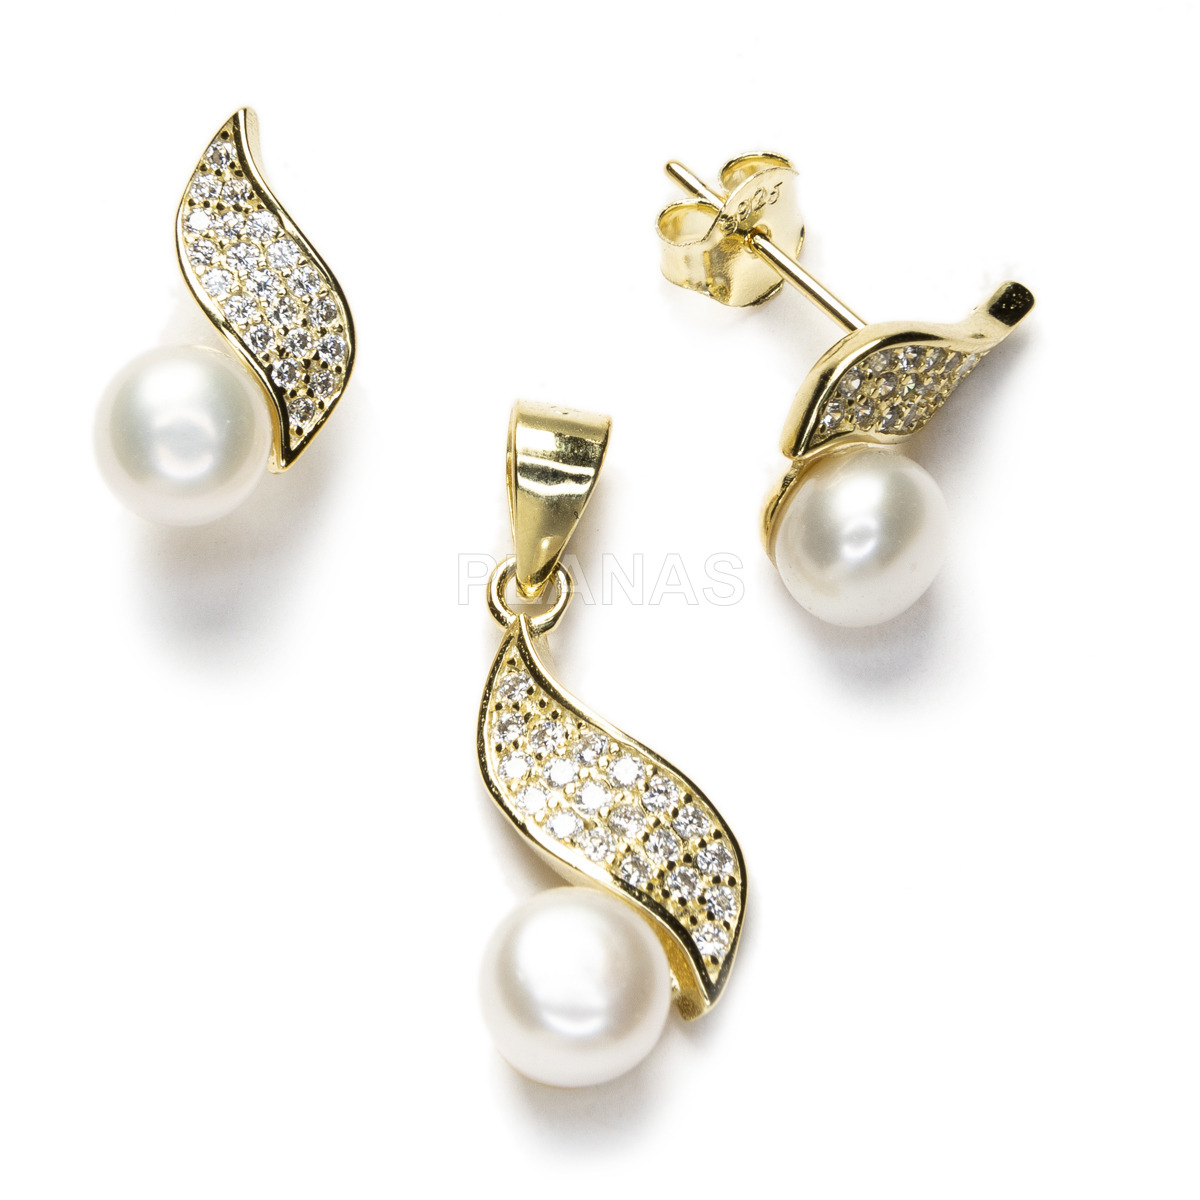 Rhodium-plated sterling silver and zirconia set with cultured pearl.